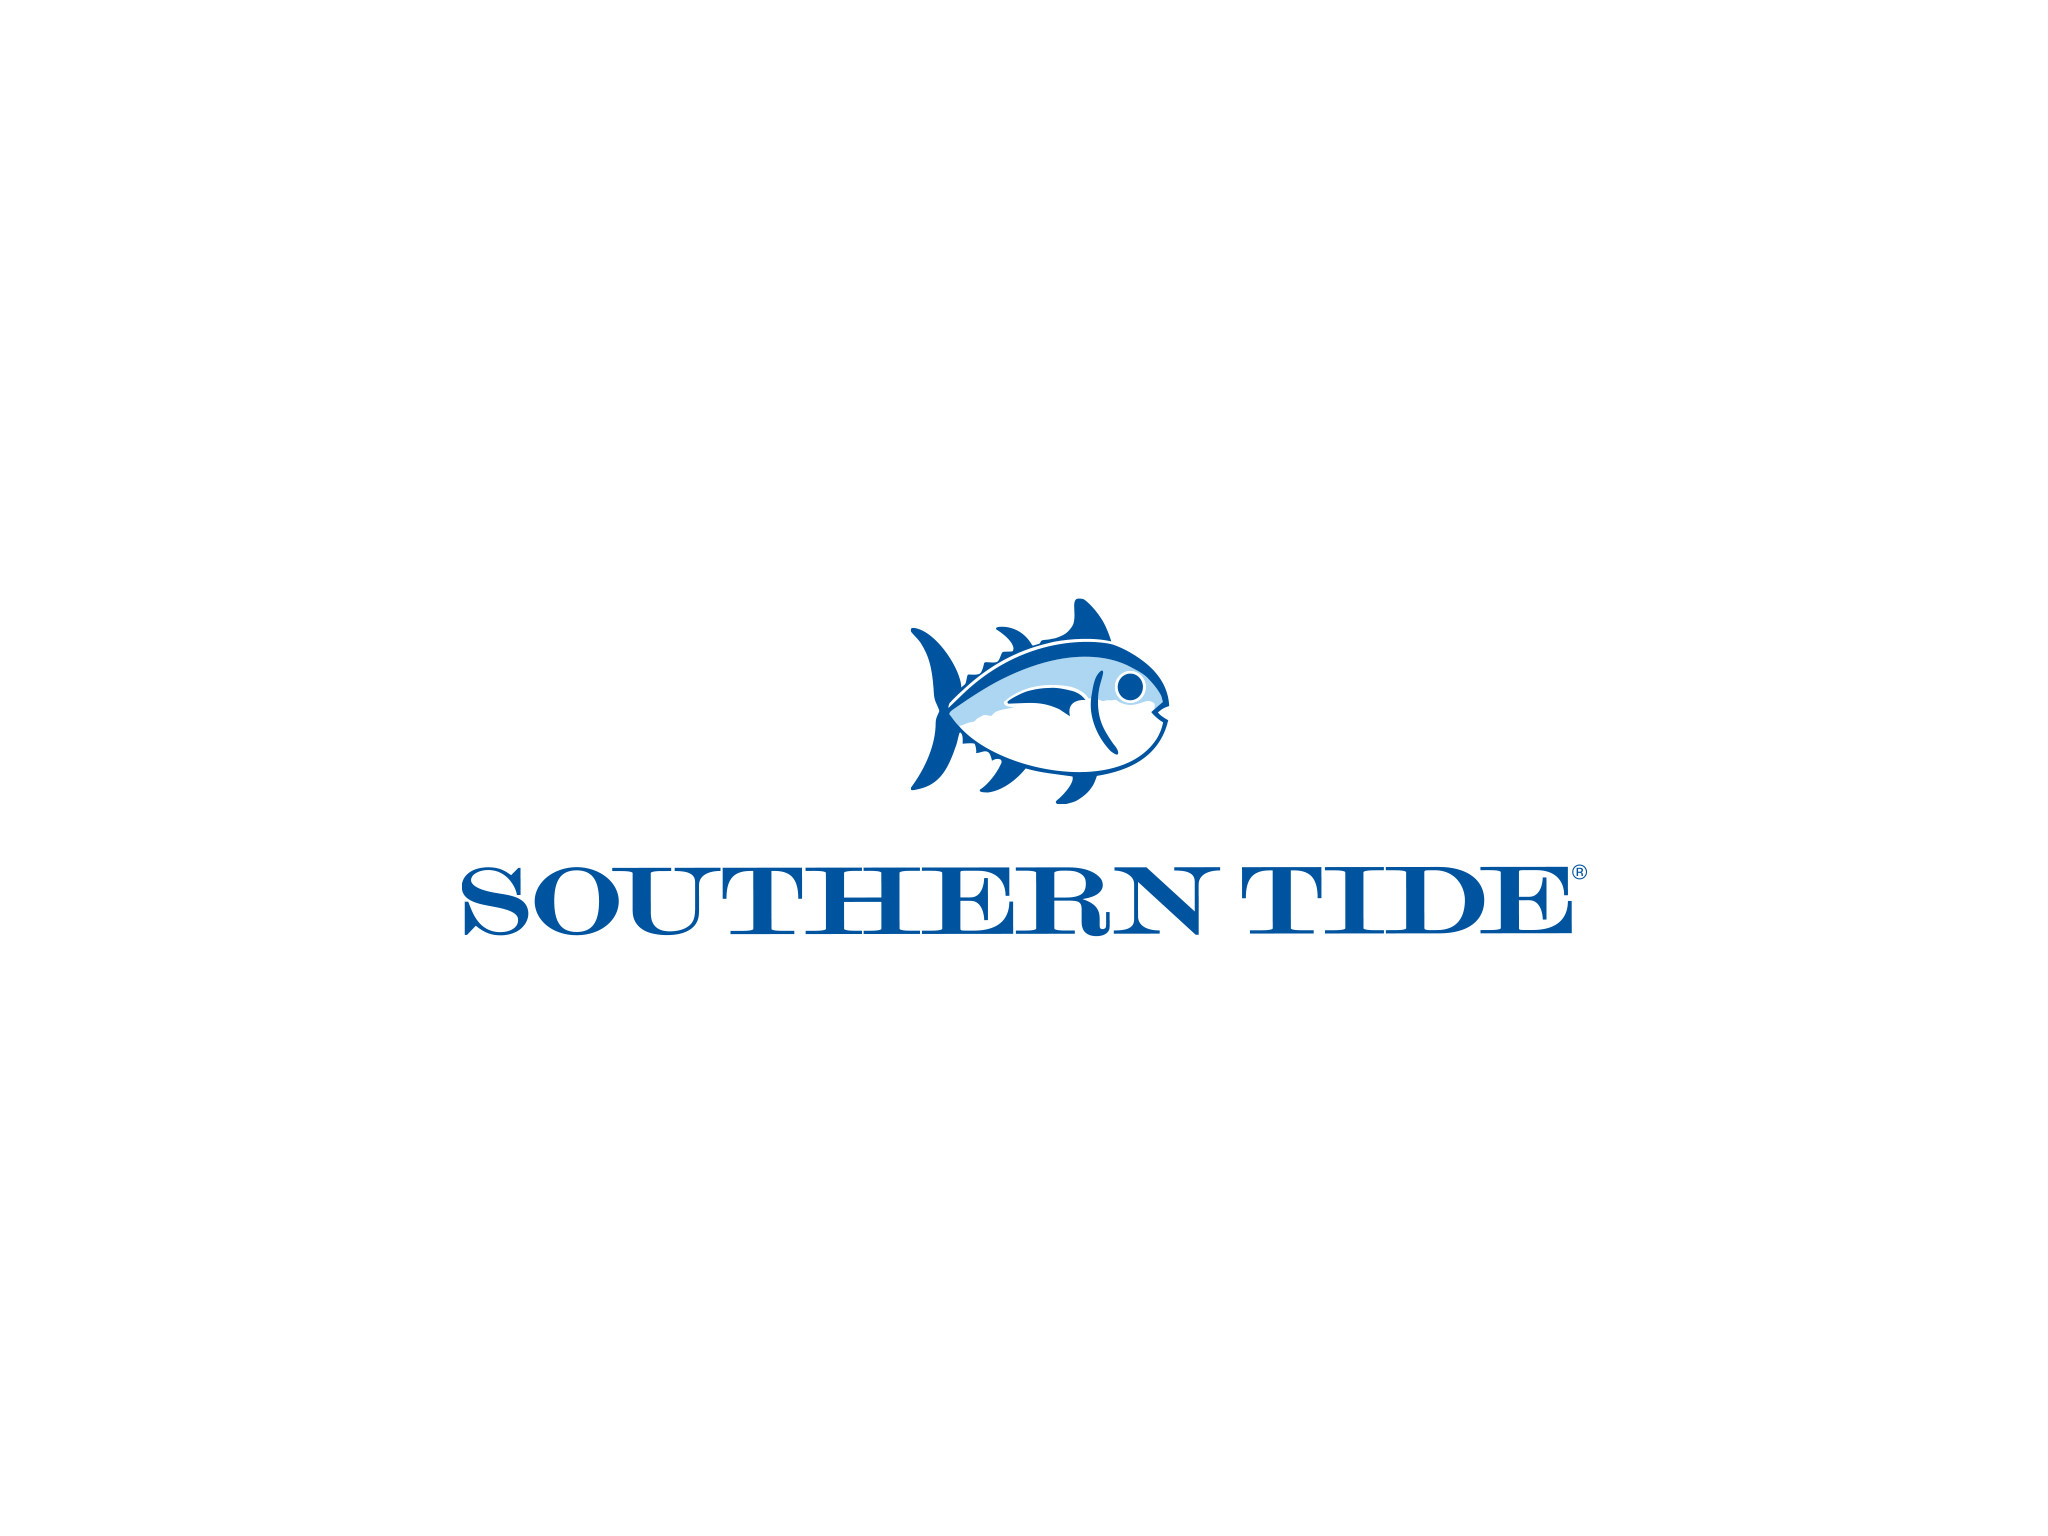 2048x1536 Southern tide iphone wallpaper imgkid the. Vineyard Vines ...